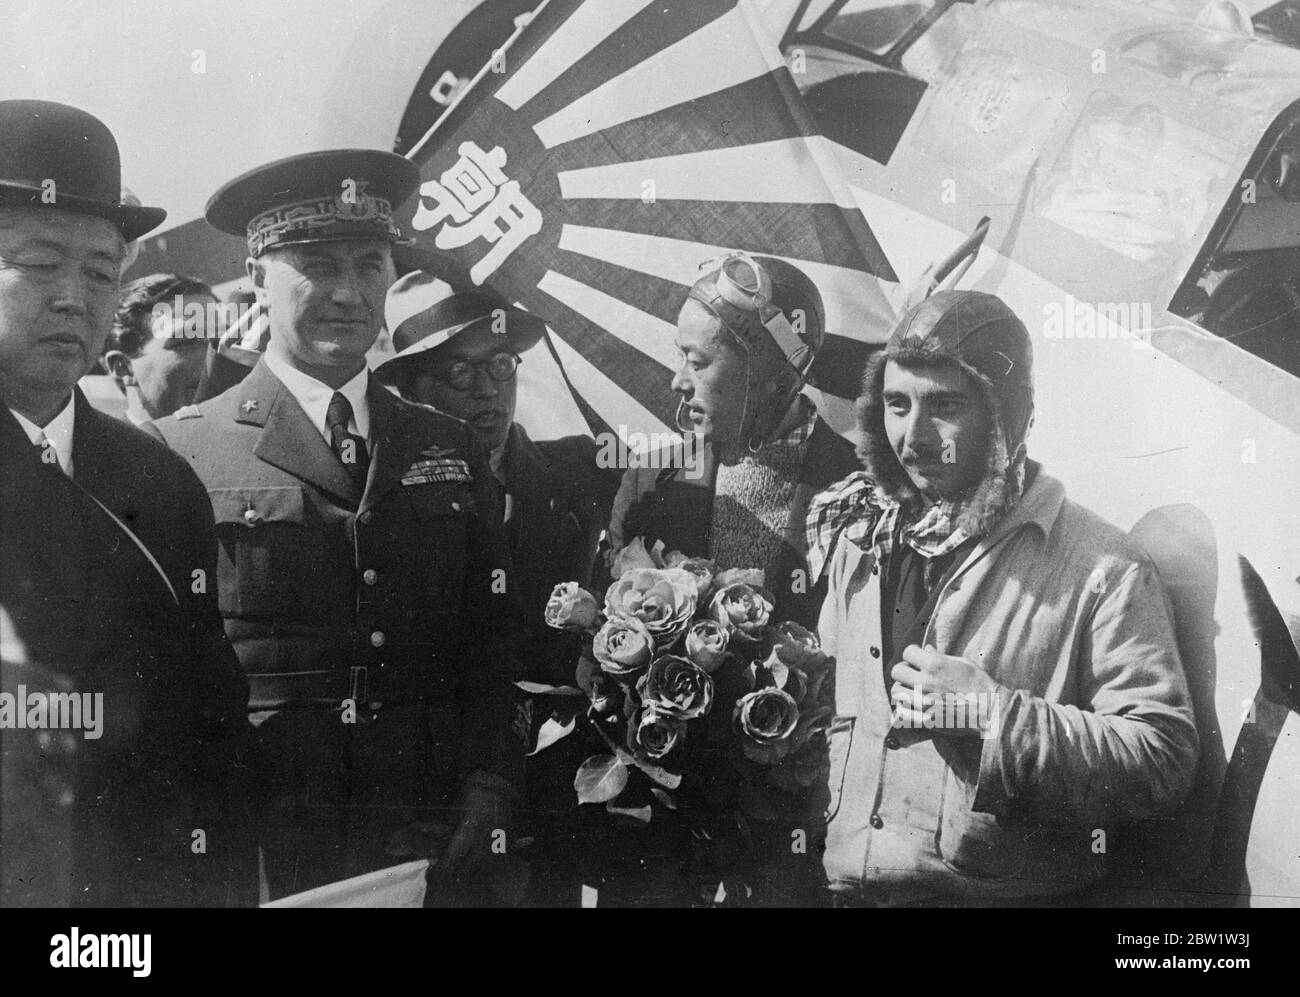 Record-breaking Japanese airmen received tremendous welcome in Rome. Landing at the Littorio Airport, Rome on their record-breaking 94 hour dash from Tokyo to London the Japanese airmen, Masaaki Iinuma, and Kenji Tsukakoshi, received a tremendous welcome from crowds gathered to welcome them. From Rome they went to complete the journey to London in an proceeded time 10,000 miles in 94 hours. Photo shows: the Japanese airmen with their plane Divine Wind [Mitsubishi Ki-15 Karigane aircraft, name: Kamikaze, registration J-BAAI] on arrival at the Littorio Airport, Rome. Iinuma, the 27-year-old pilo Stock Photo